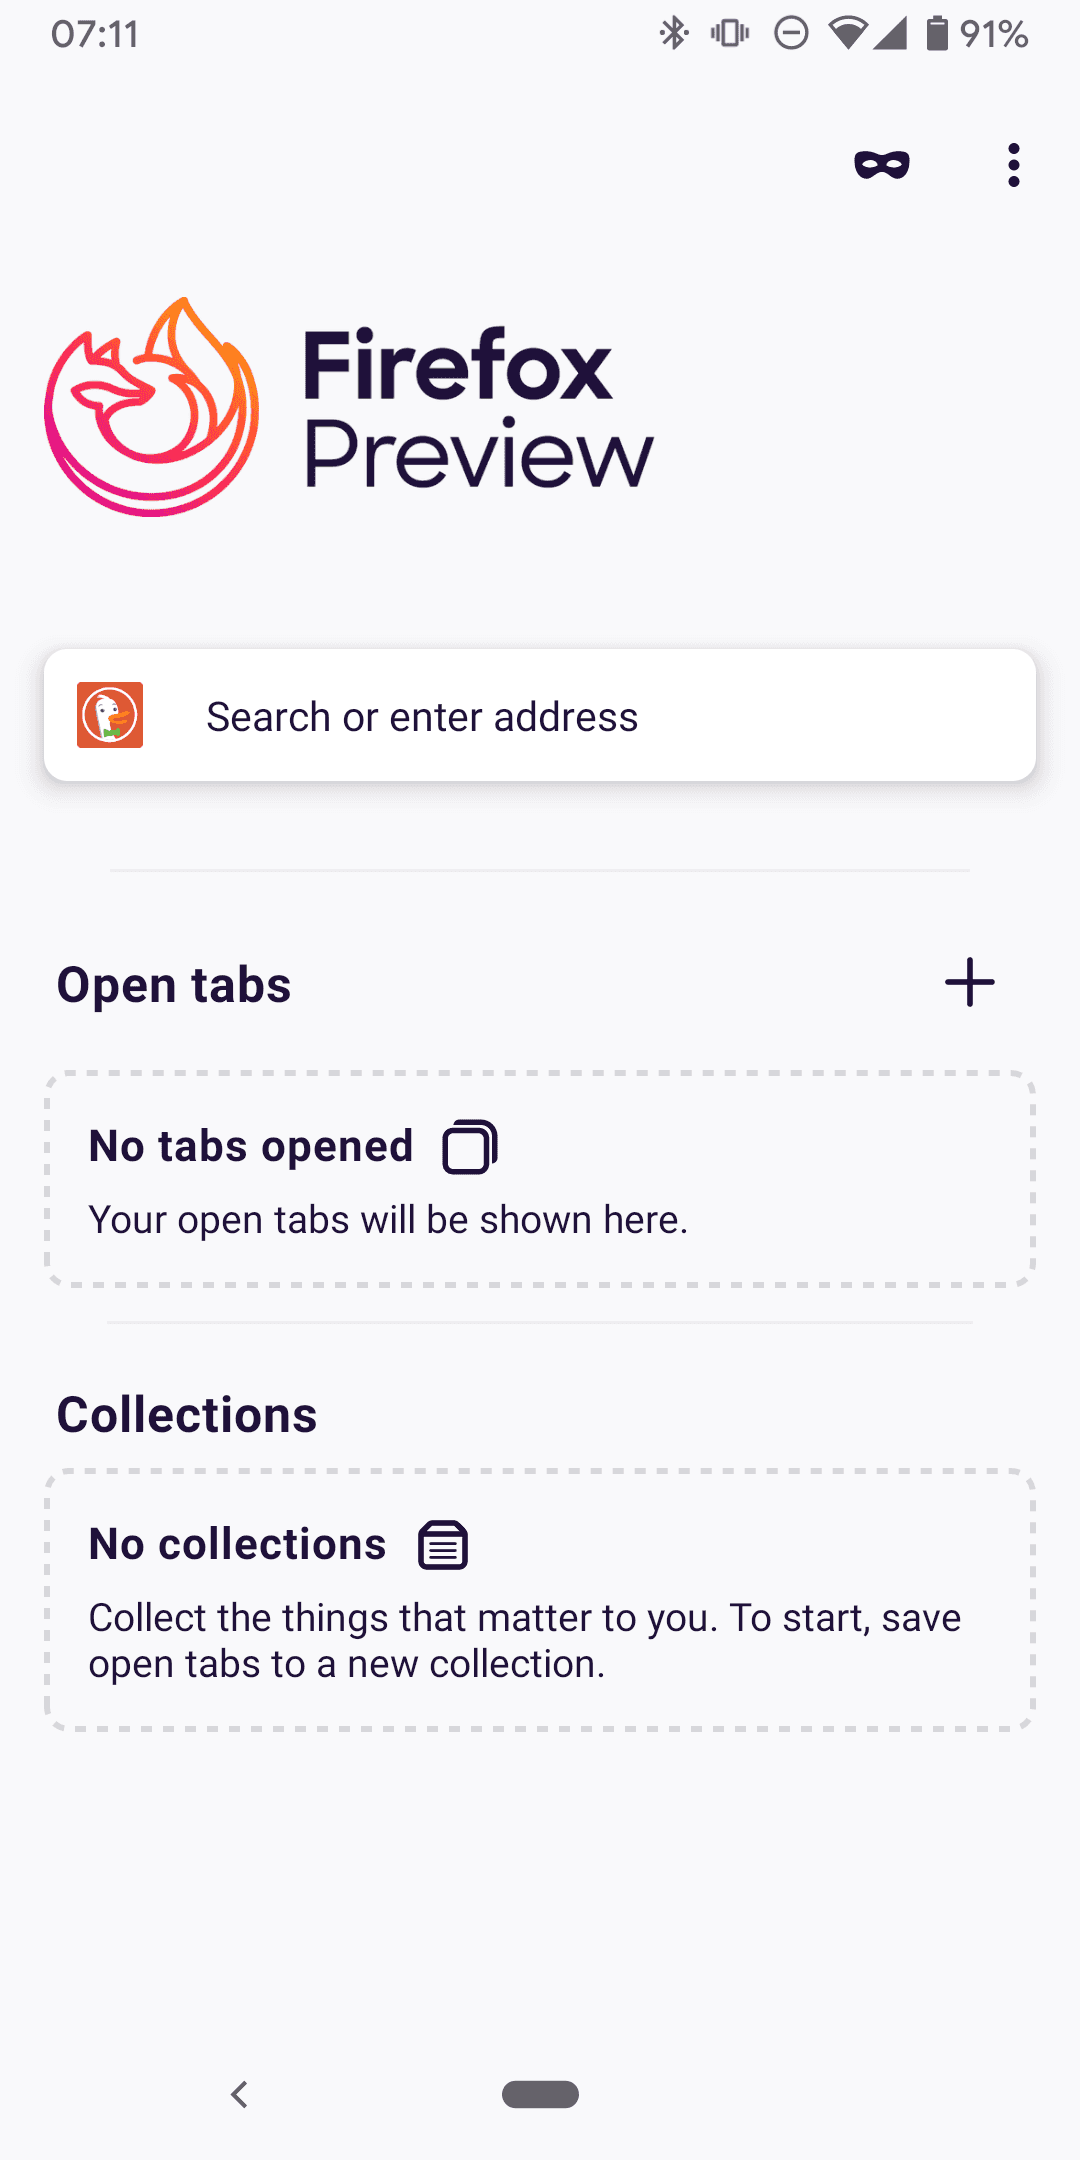 Screenshot of No collections or open tabs in Firefox Preview 2.0 for Android